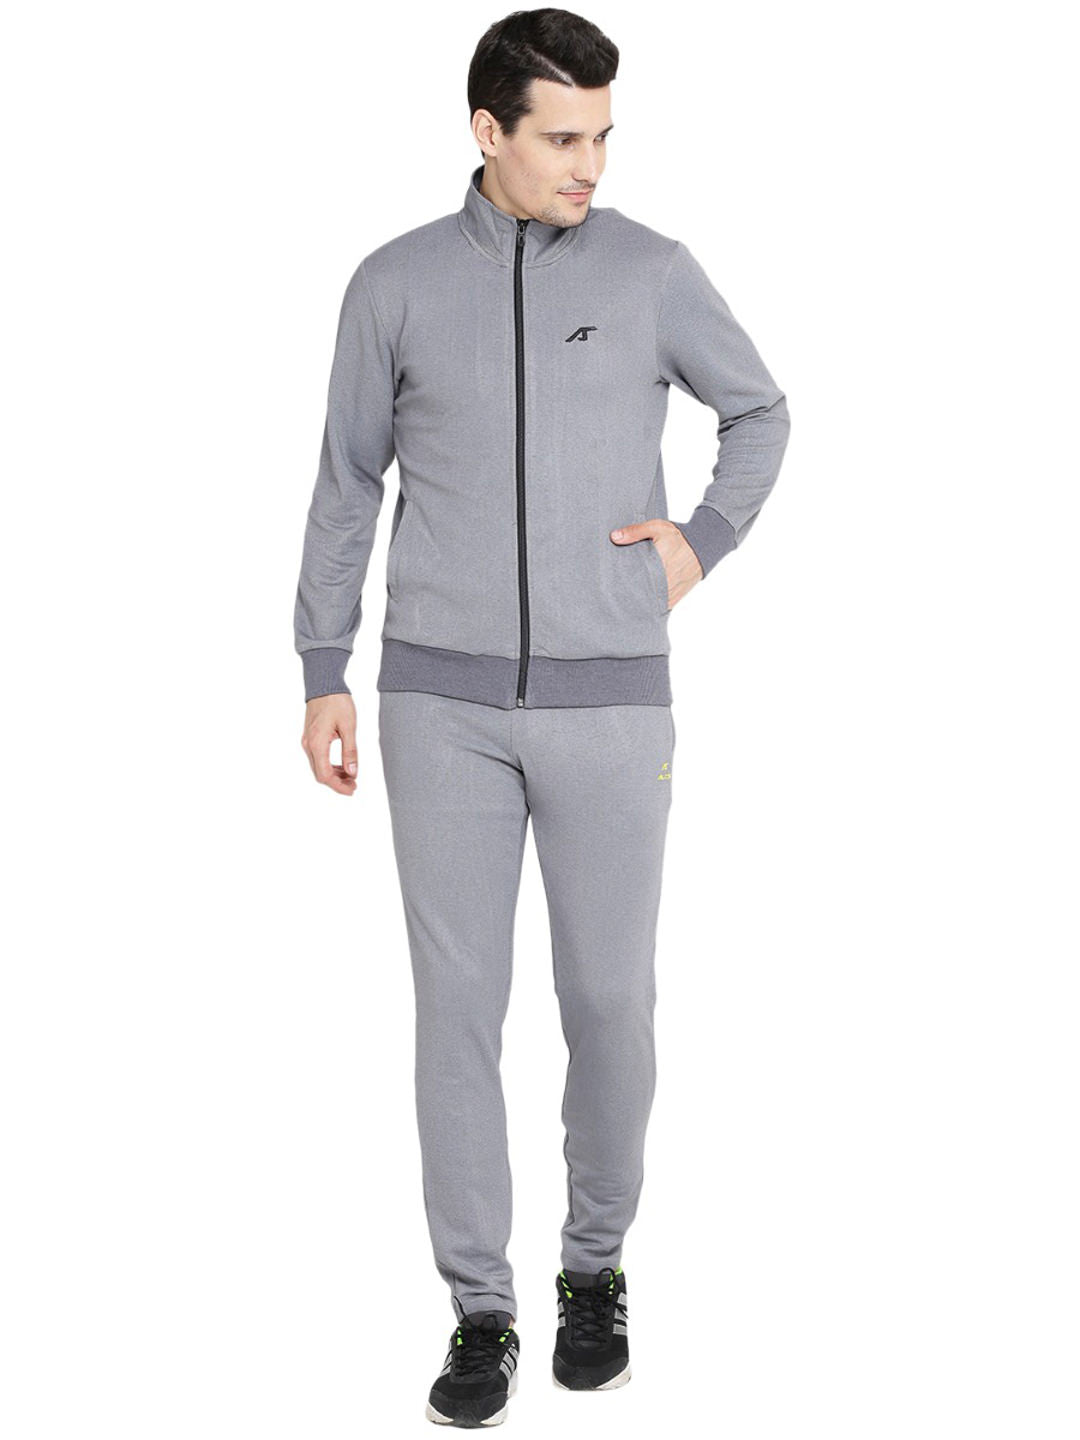 Alcis Mens Solid Grey Track Suit 125MTS174 125MTS174-S